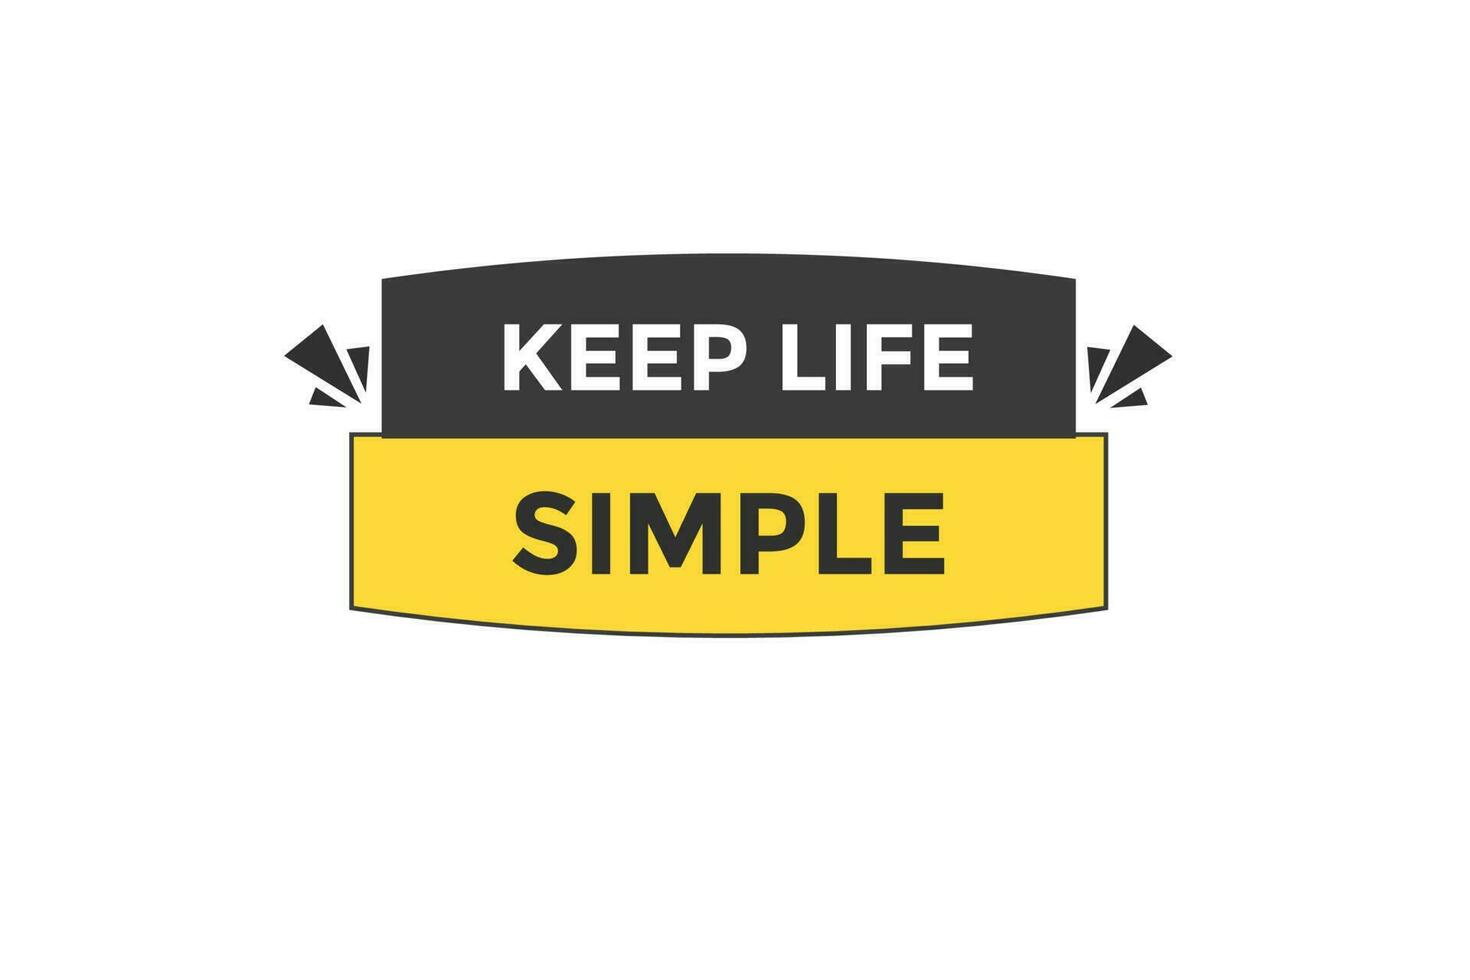 keep life simple vectors.sign label bubble speech keep life simple vector